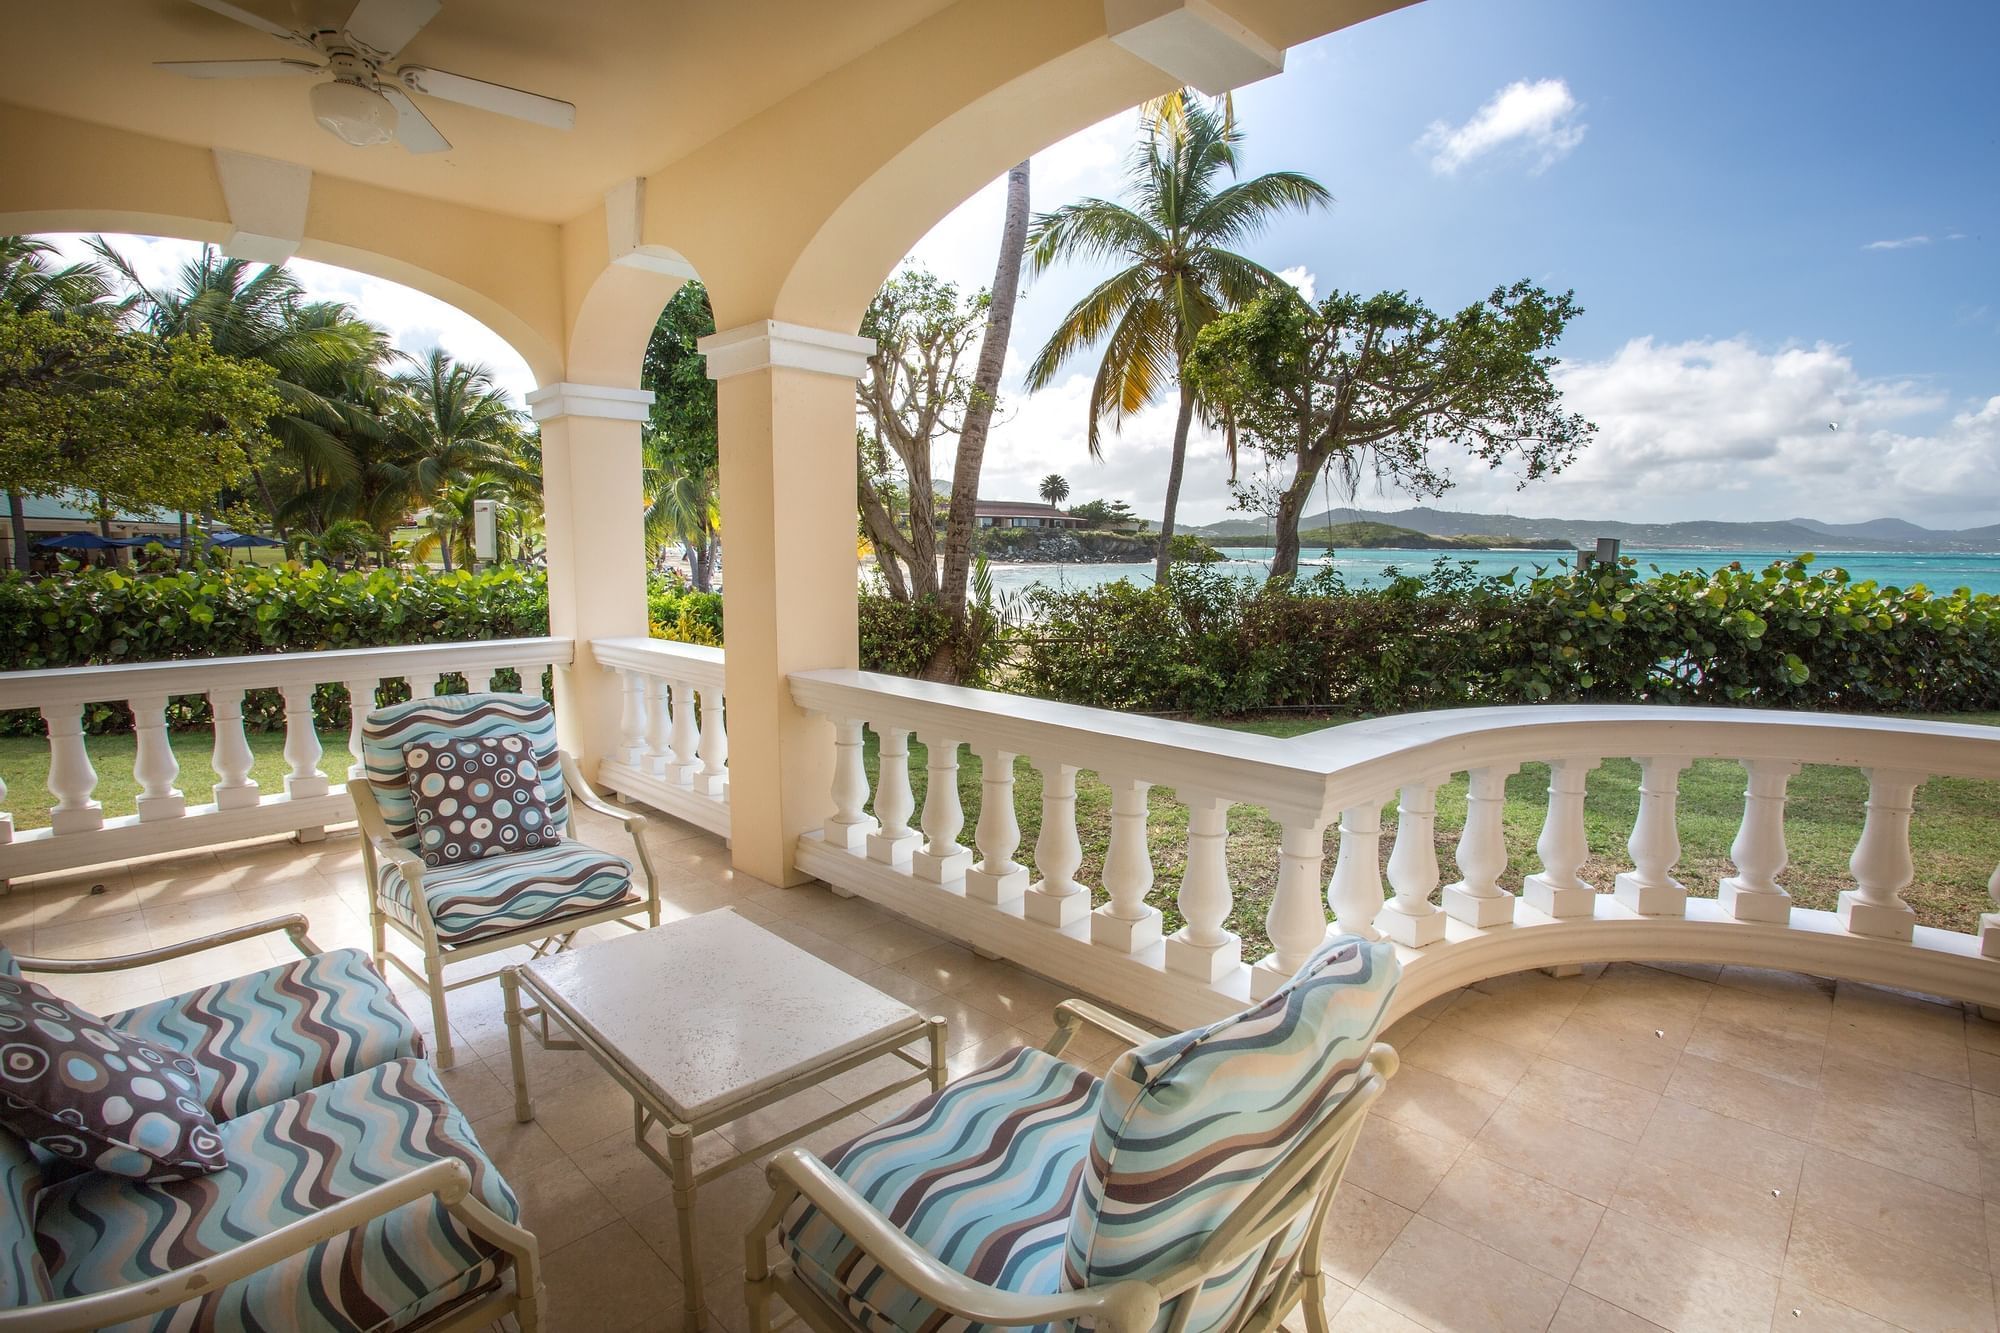 Lounge area in a Suite balcony with sea view at The Buccaneer Resort St. Croix